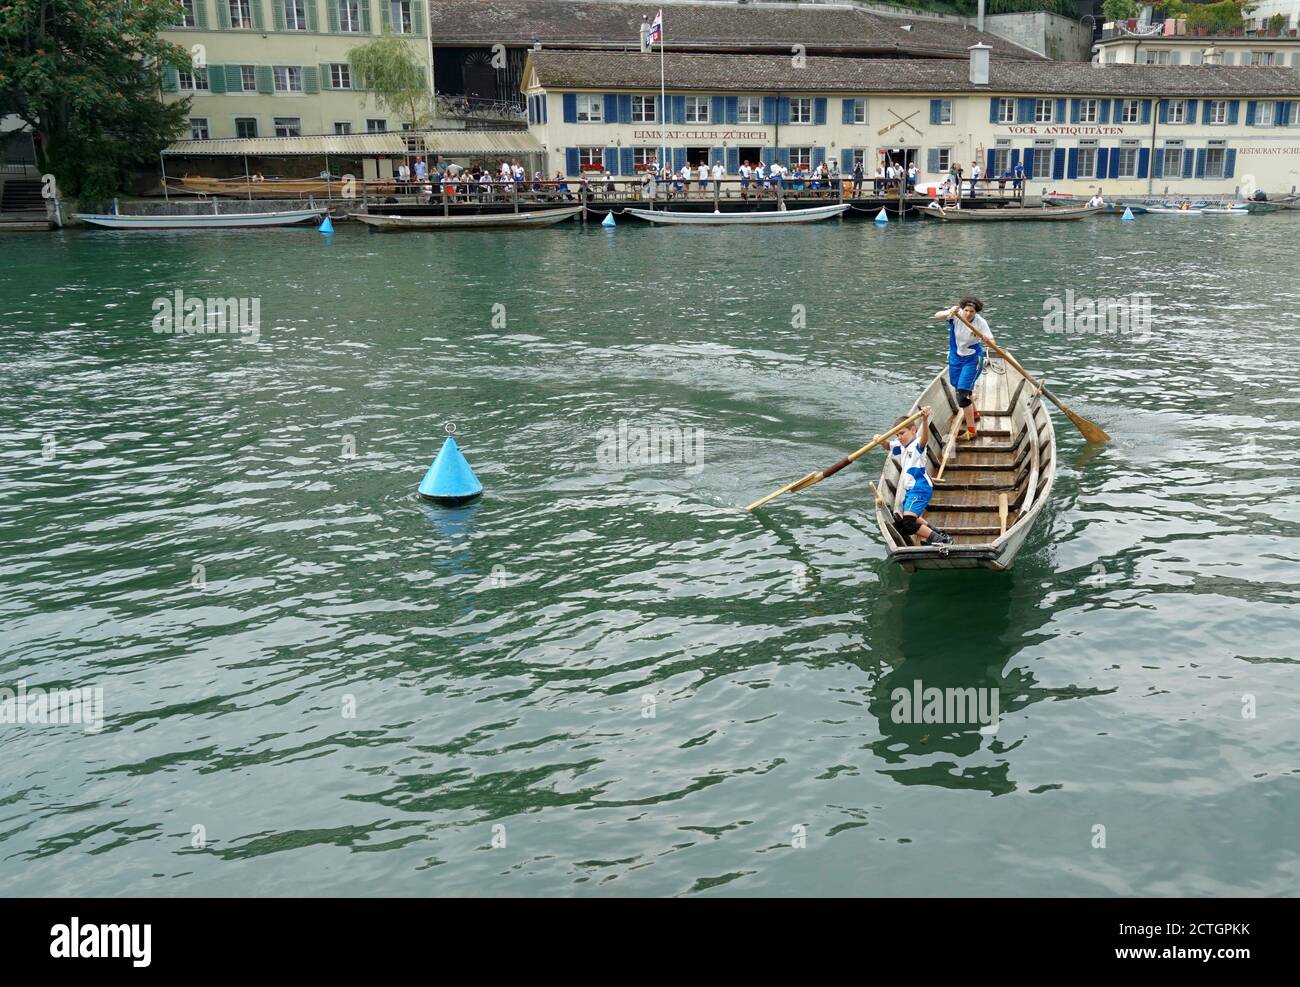 A Swiss fisherman traditional wooden boat with one small boy and woman. They are standing and move the vessel with oars on the Limmat river in Zurich. Stock Photo